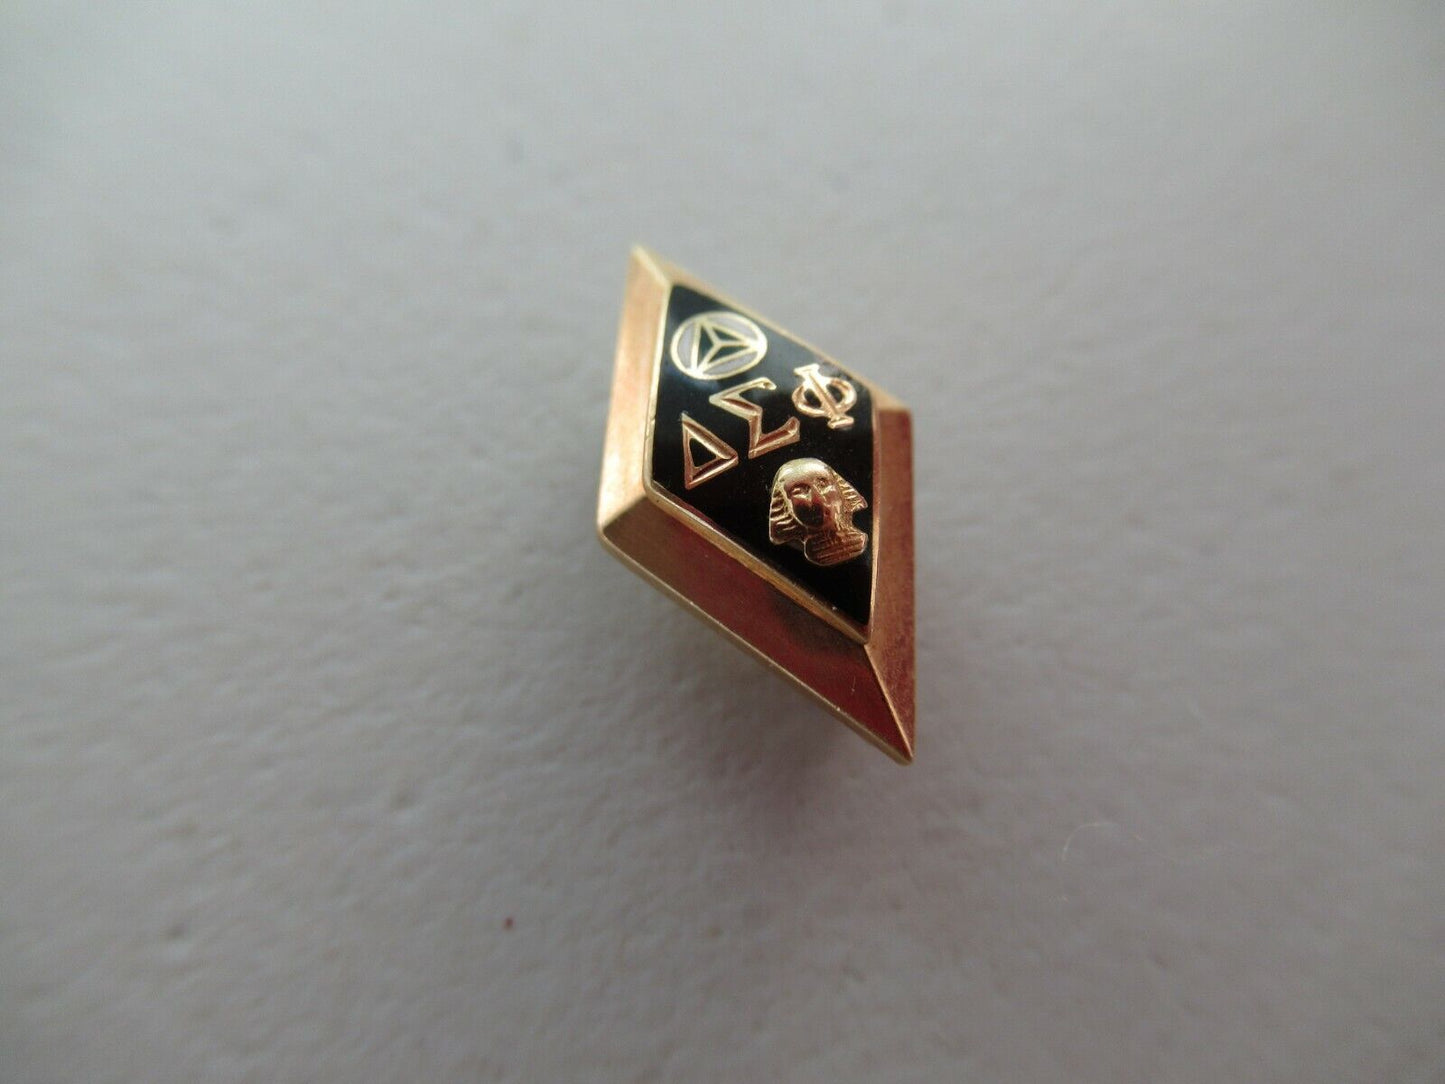 USA FRATERNITY PIN DELTA SIGMA PHI. MADE IN GOLD. NUMBERED. NAMED. 115